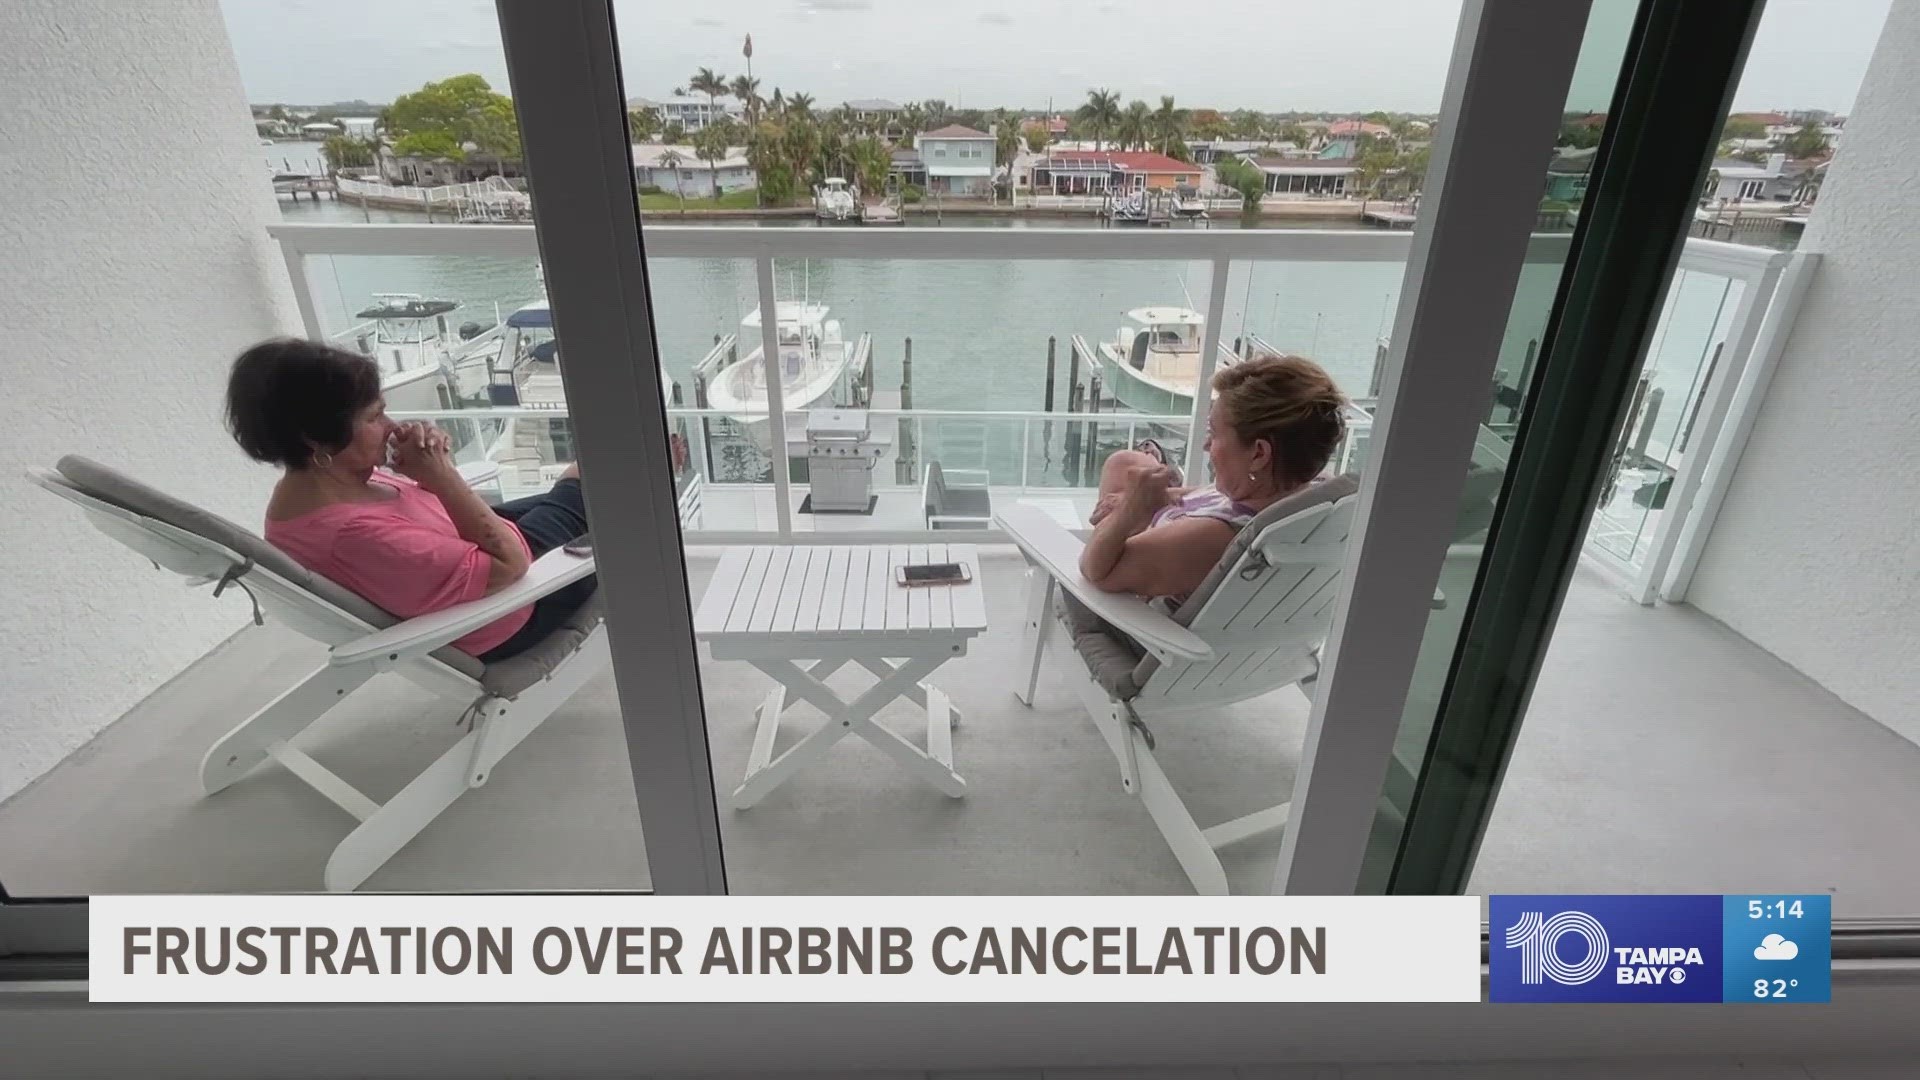 The Airbnb the family rented back in November for a dozen friends and family members, canceled on them just two days before their visit to St. Petersburg.